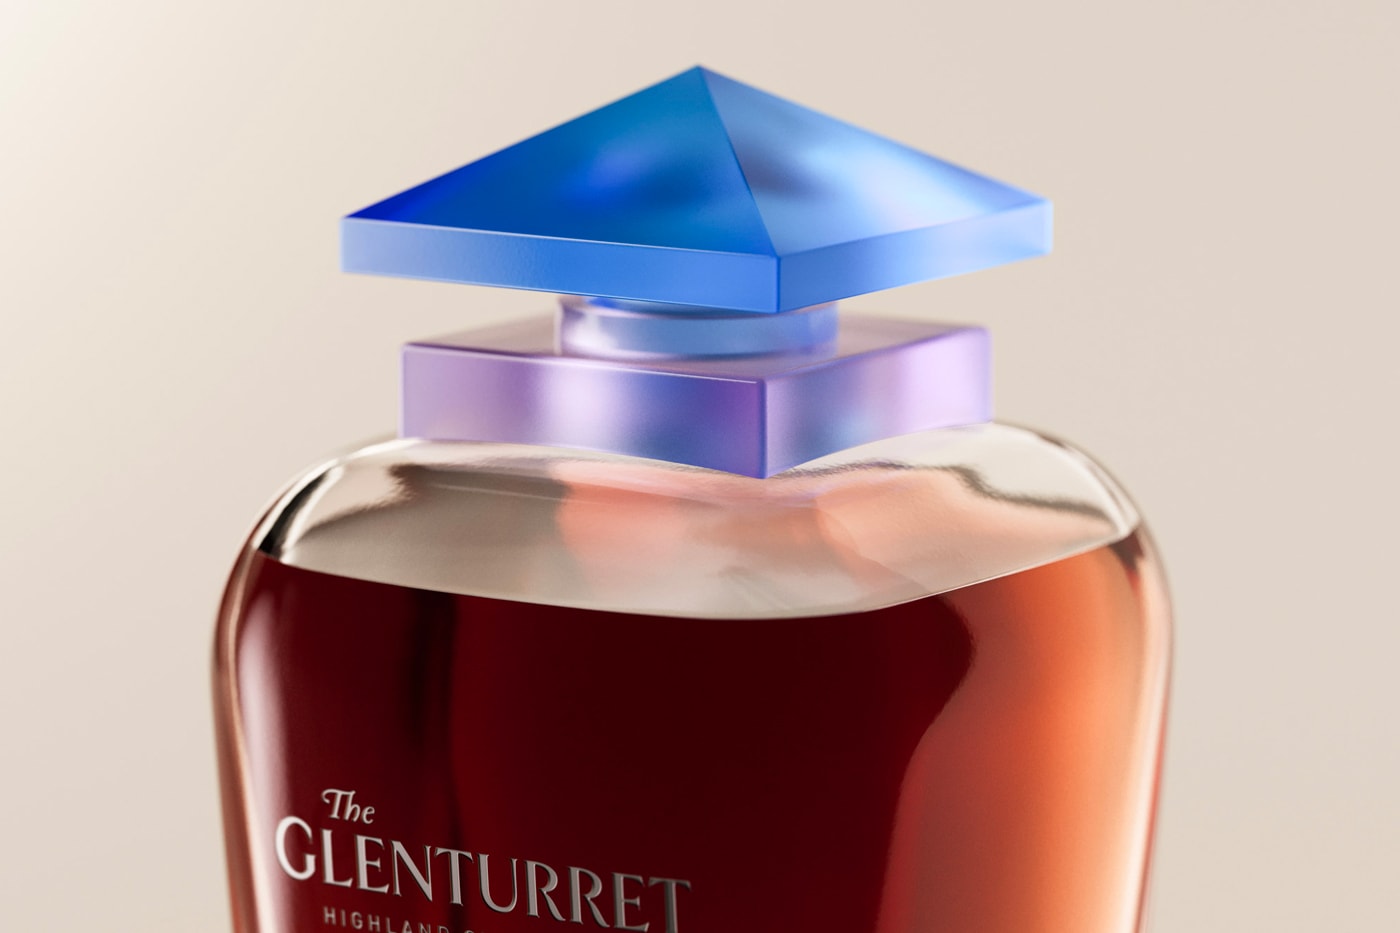 James Turrell Reveals $100K USD Limited-Edition Decanter with The Glenturret and Lalique bottle craftsmanship 80th birthday scotland's oldest working distillery luxury french glassmaker artist contemporary art referencing egypt